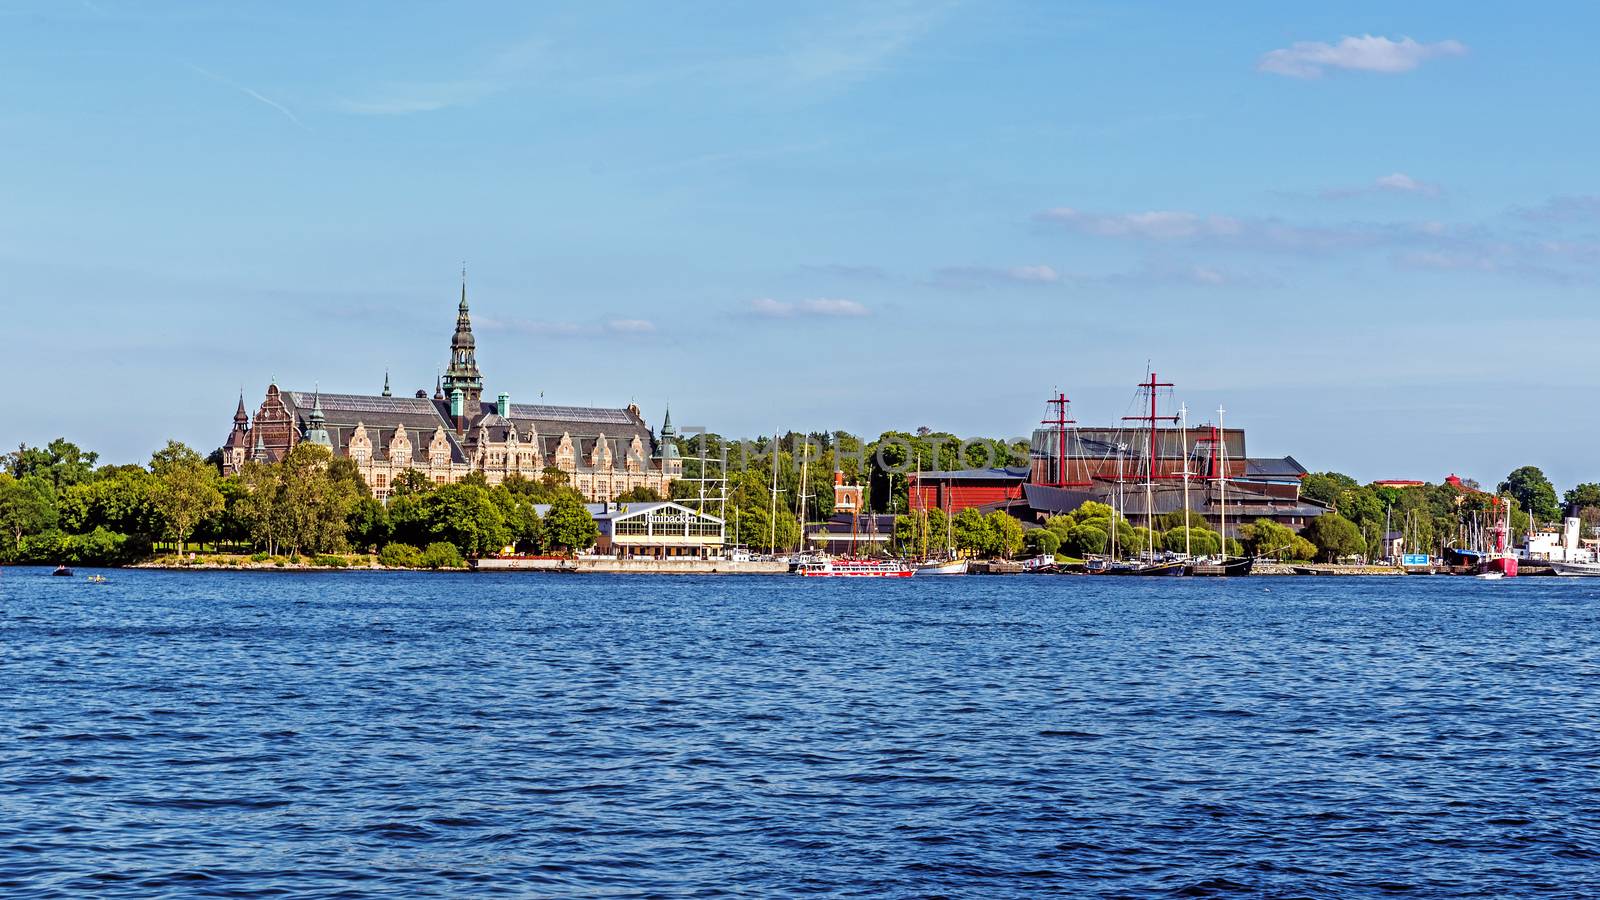 The Nordic and Vasa Museums on Djurgarden Island in Stockholm. The Island is home to historical buildings, monuments, galleries, the amusement park Grona Lund and the open-air Skansen.